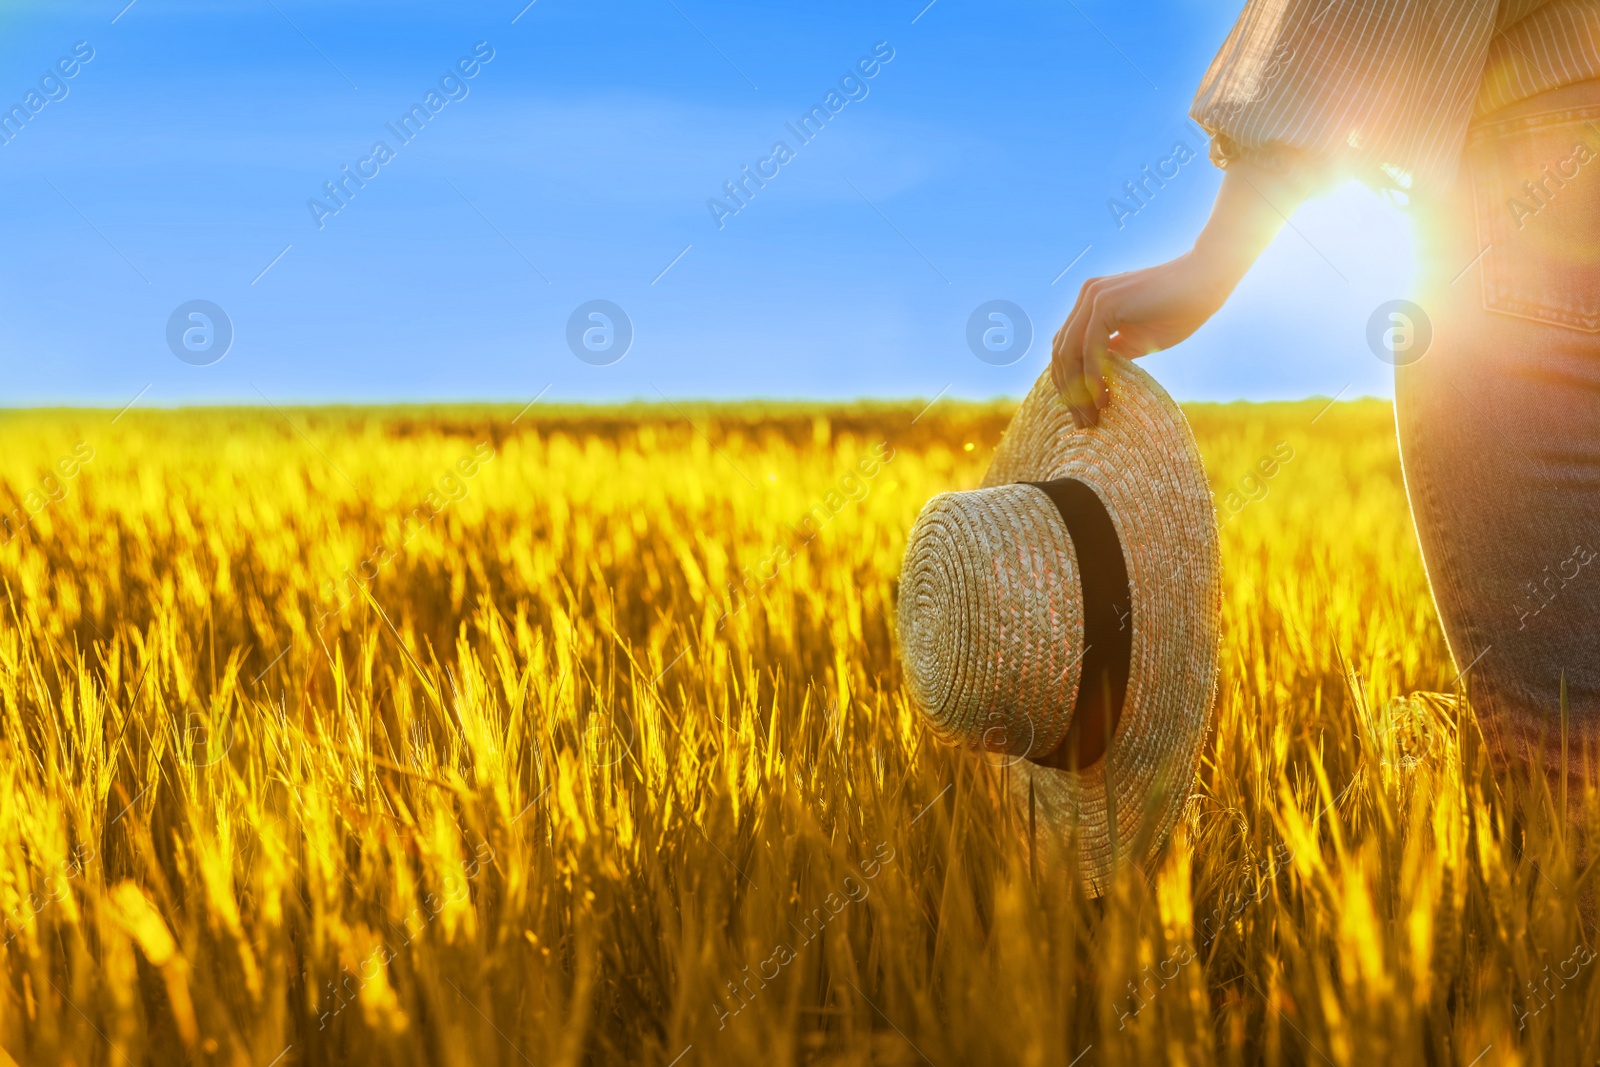 Image of Ukrainian flag. Woman with straw hat in yellow wheat field under blue sky on sunny day, closeup